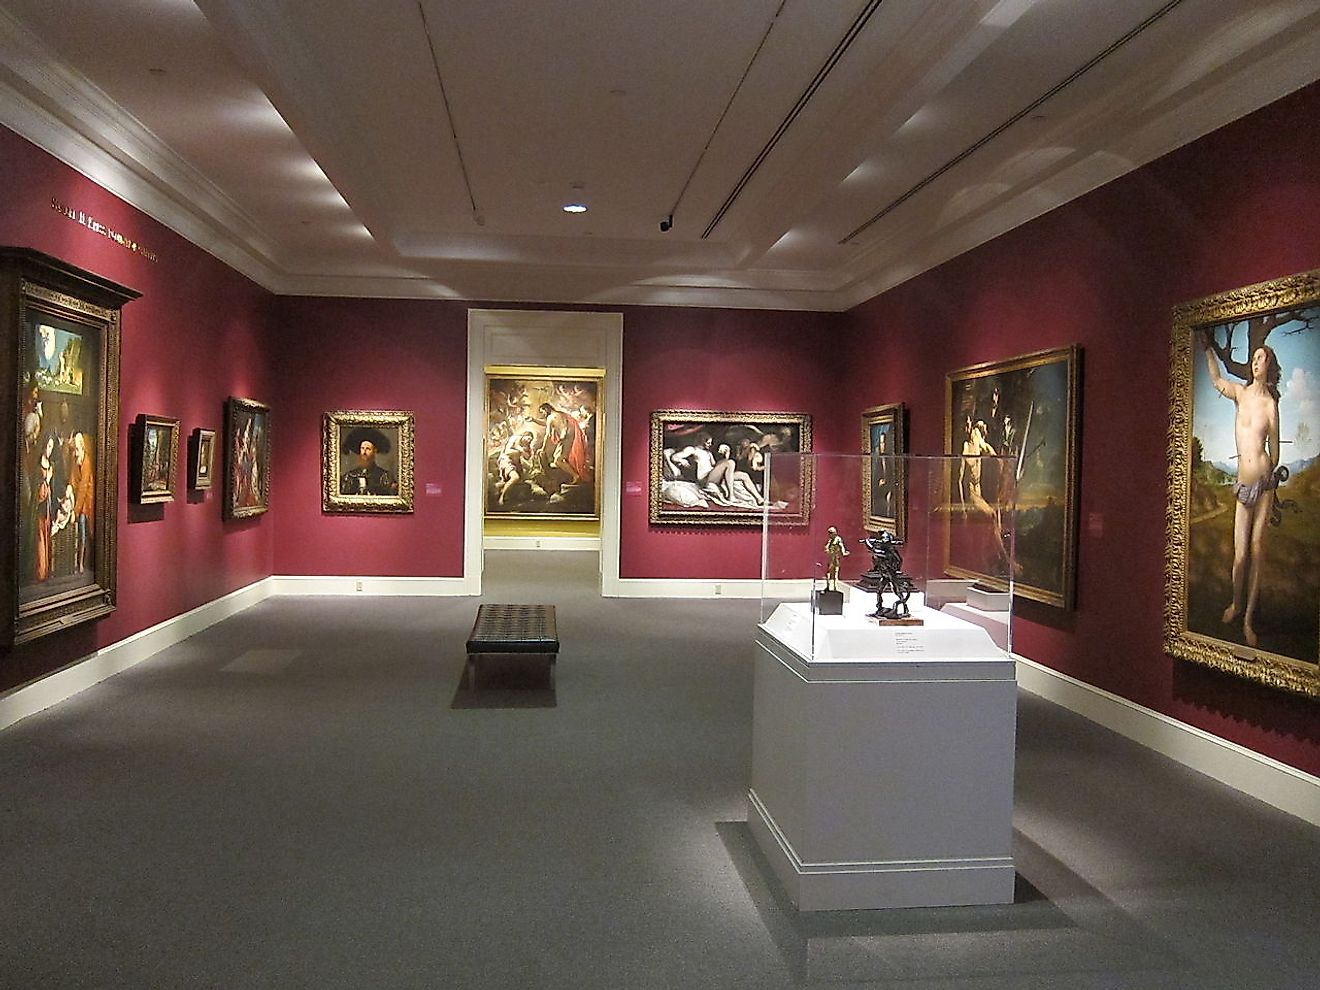 In a gallery in the New Orleans Museum of Art. Image credit: Satanoid/Wikimedia.org